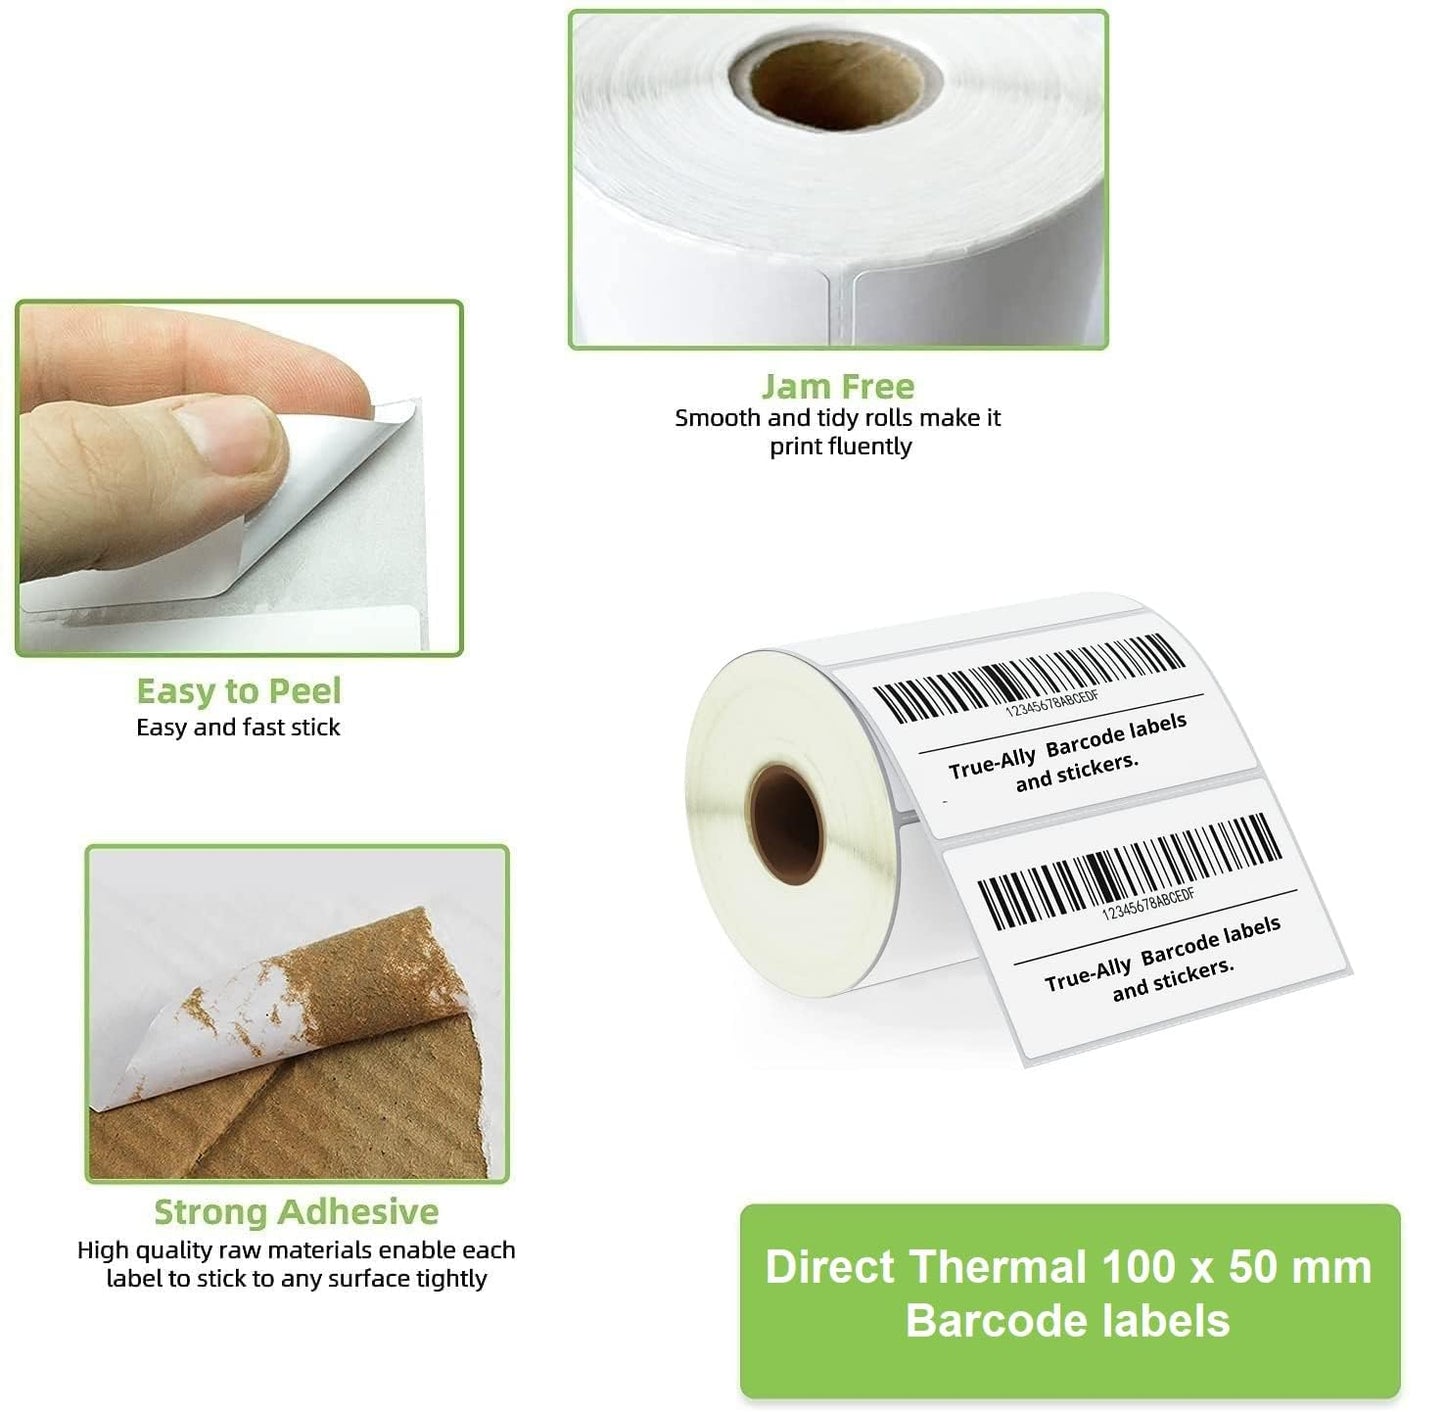 KIYA 100x50 Barcode Label Sticker  - 100mm x 50mm - 1 Ups - 1000 Labels Per Roll - White Self Adhesive Sticker for Printing Barcoding (1 Roll Per Pack (1000 Labels))